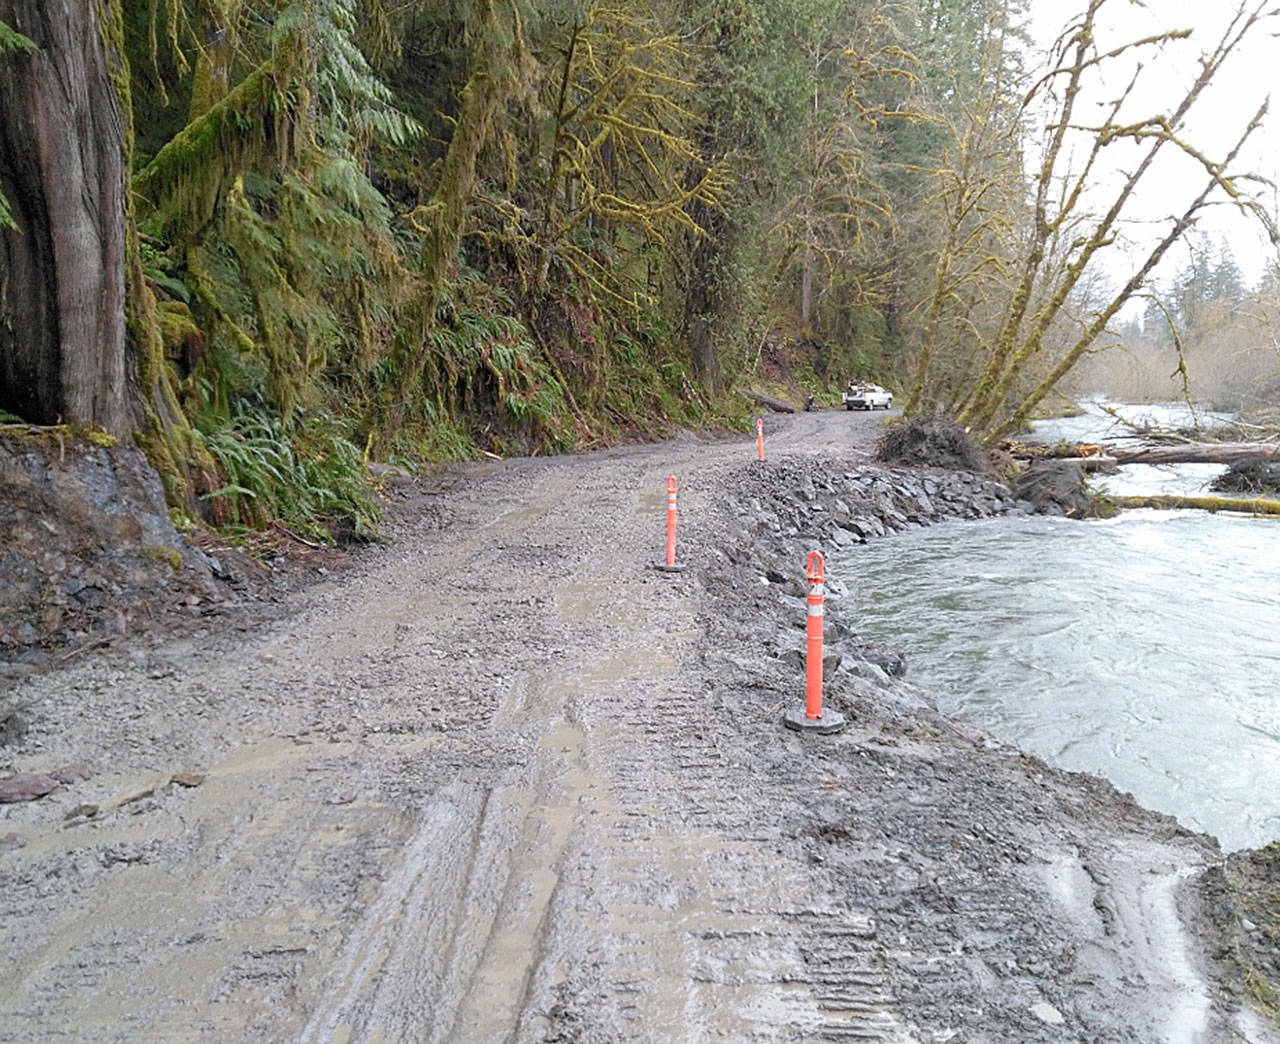 An emergency repair allowed the roadway to be useable but left it very narrow. A permanent fix is planned beginning next month. (Olympic National Park)